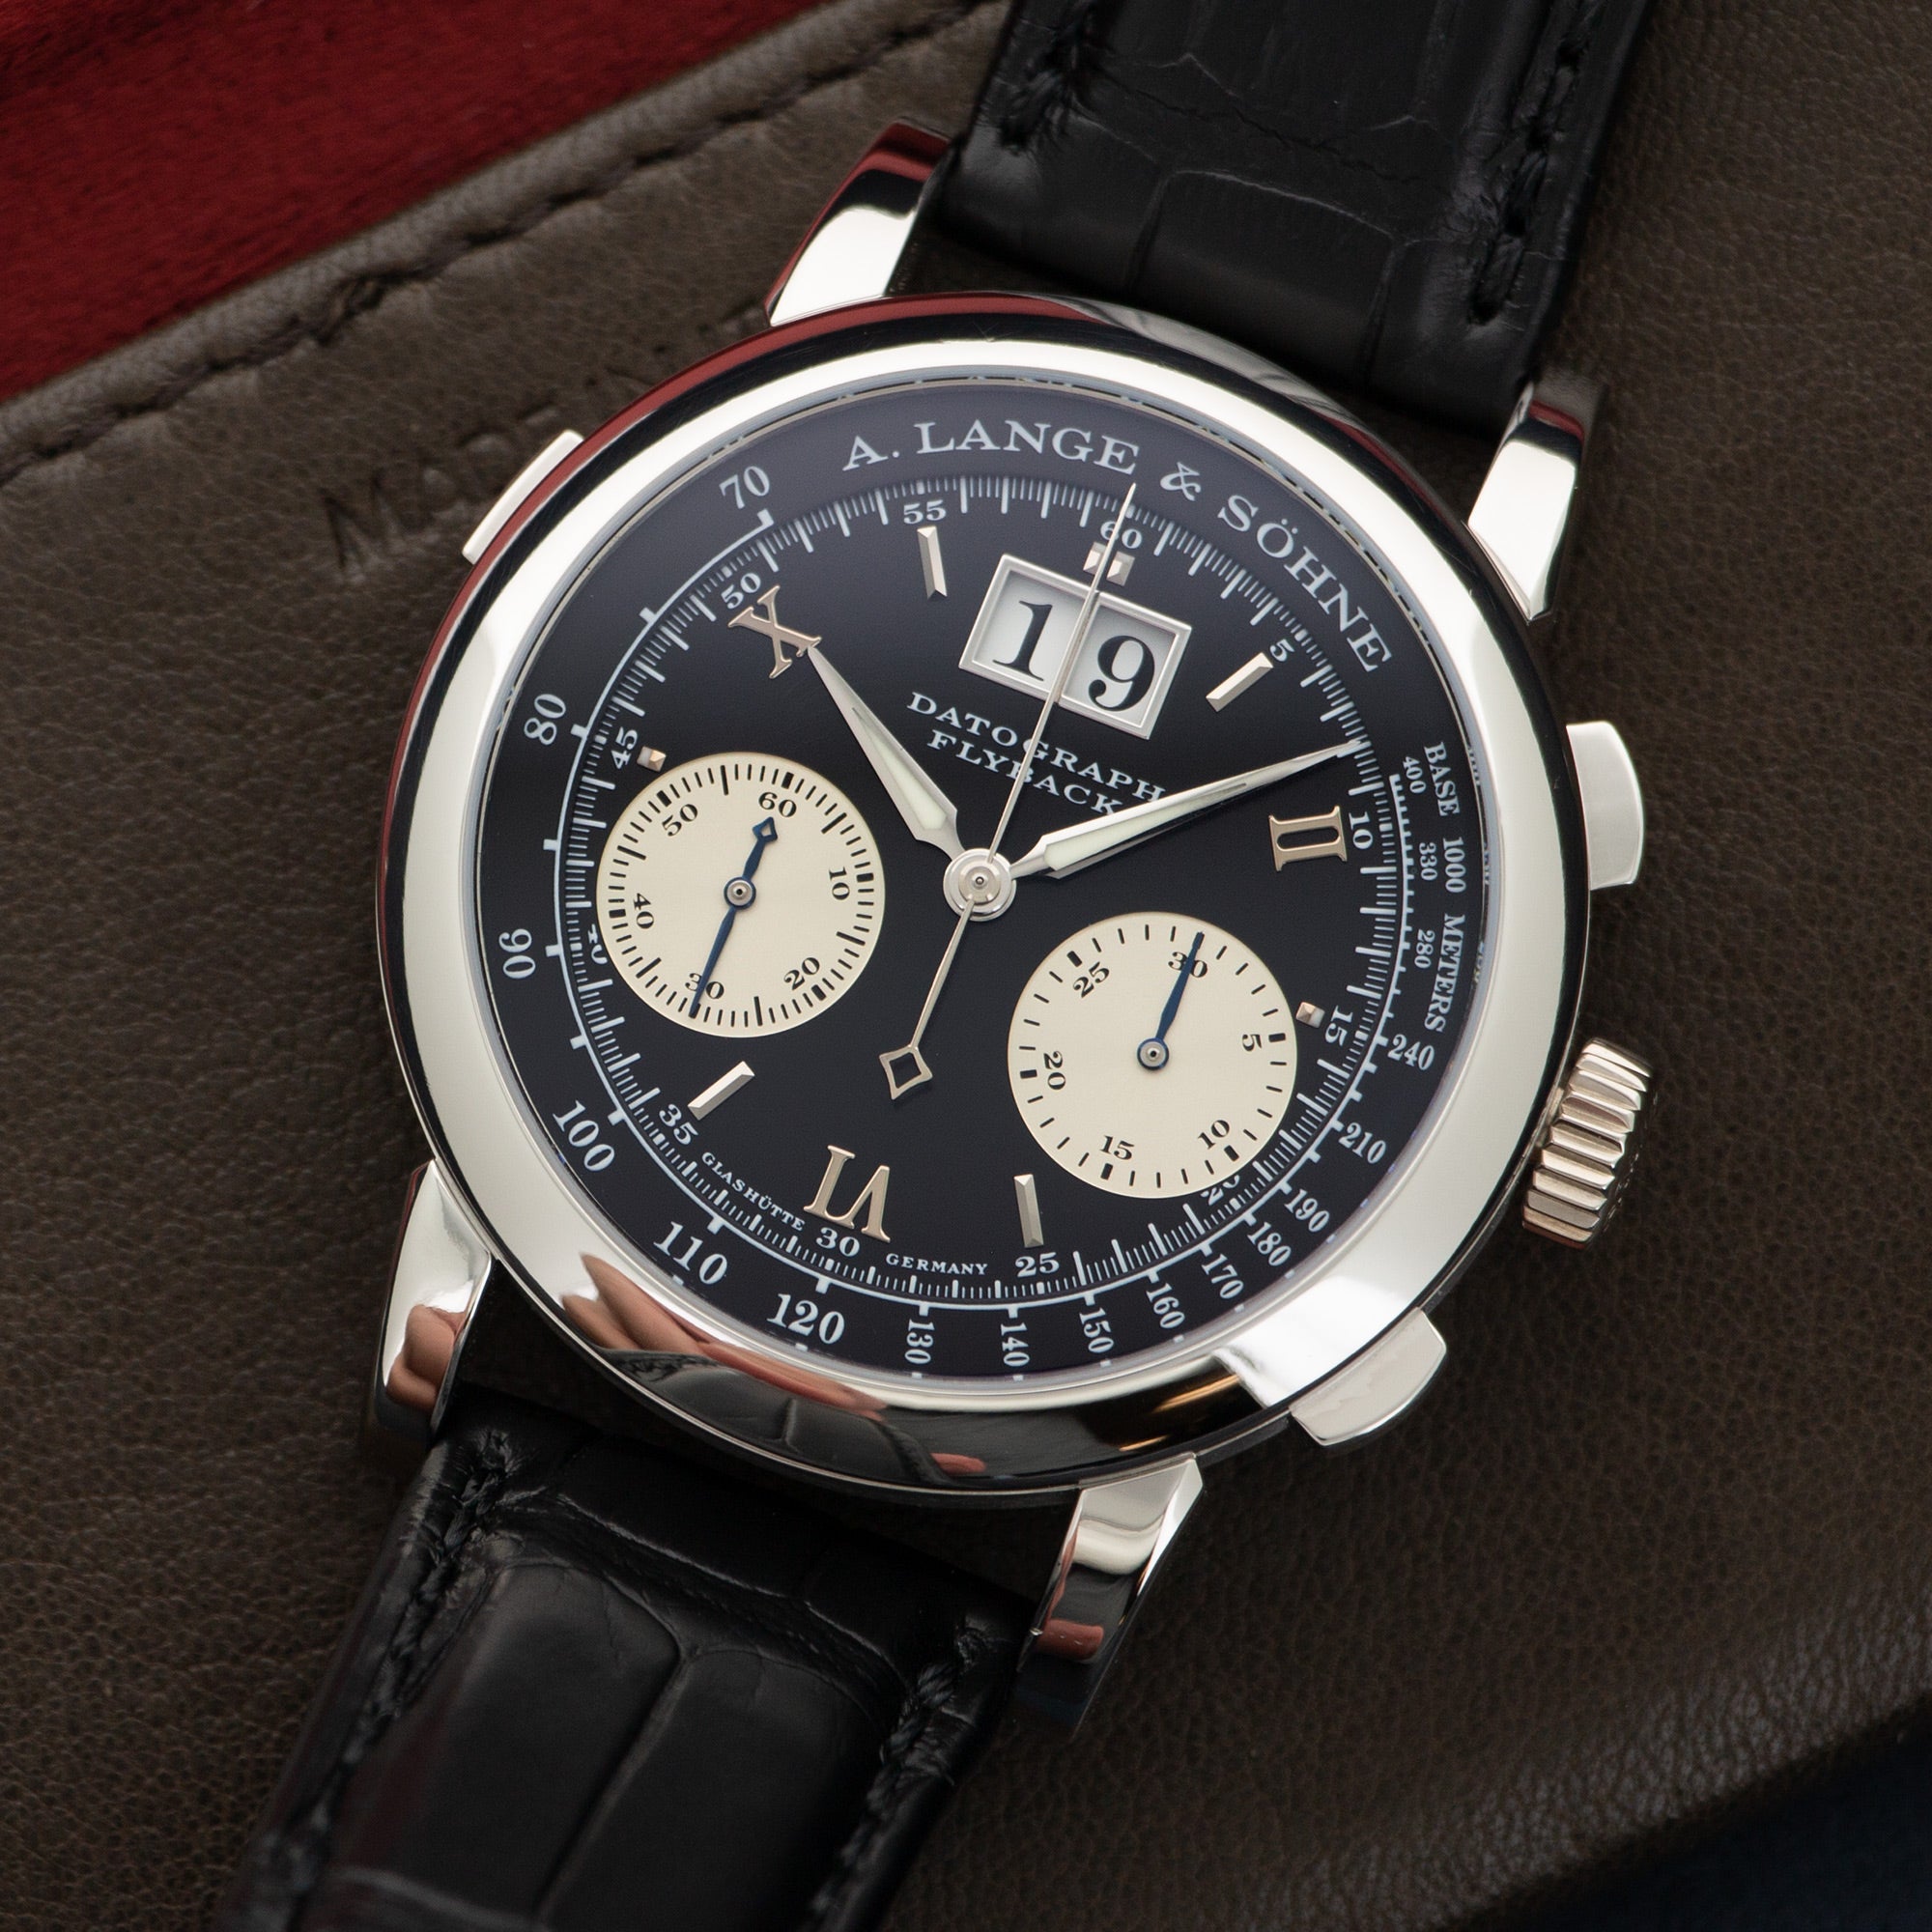 A. Lange &amp; Sohne - A. Lange &amp; Sohne Platinum Datograph Watch Ref. 403.035 - The Keystone Watches